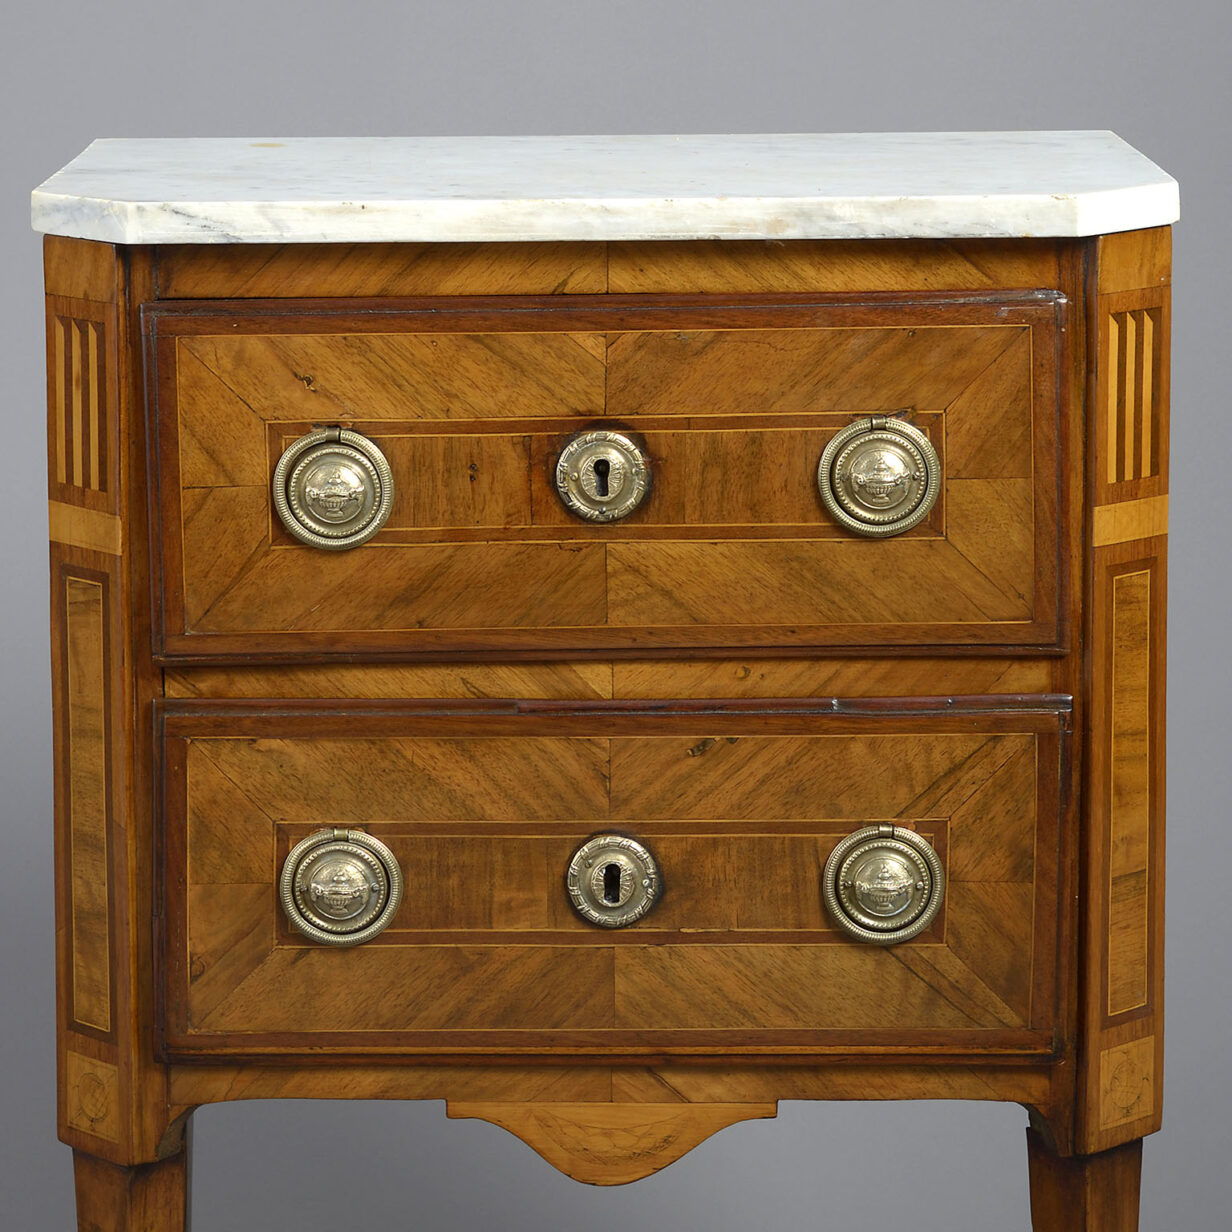 Pair of late 18th century parquetry inlaid bedside cabinets